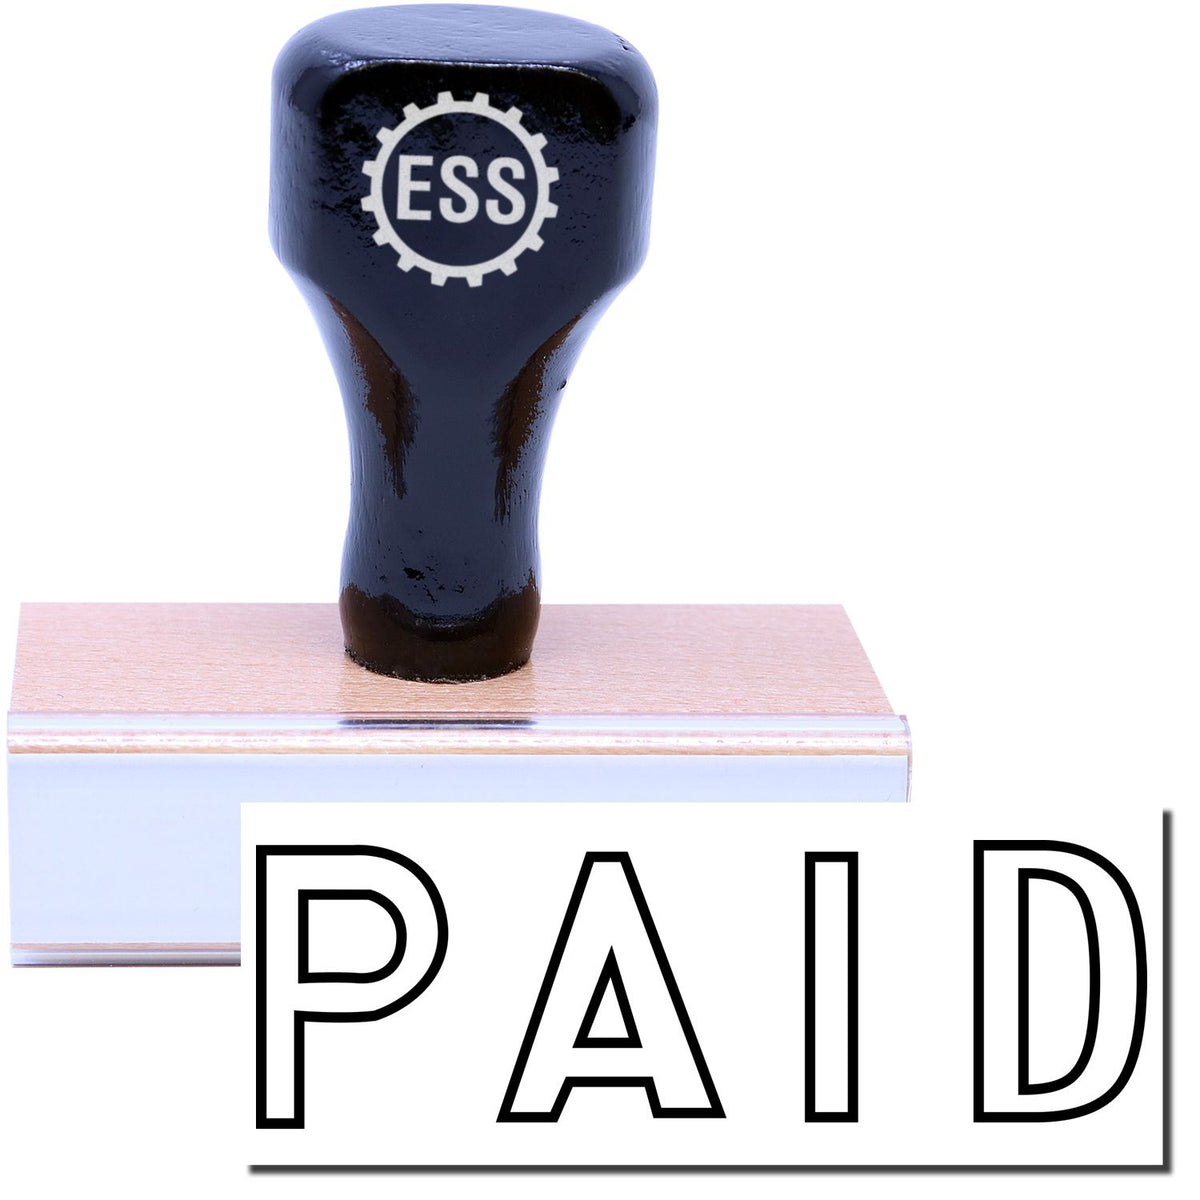 A stock office rubber stamp with a stamped image showing how the text &quot;PAID&quot; in a large outline font is displayed after stamping.